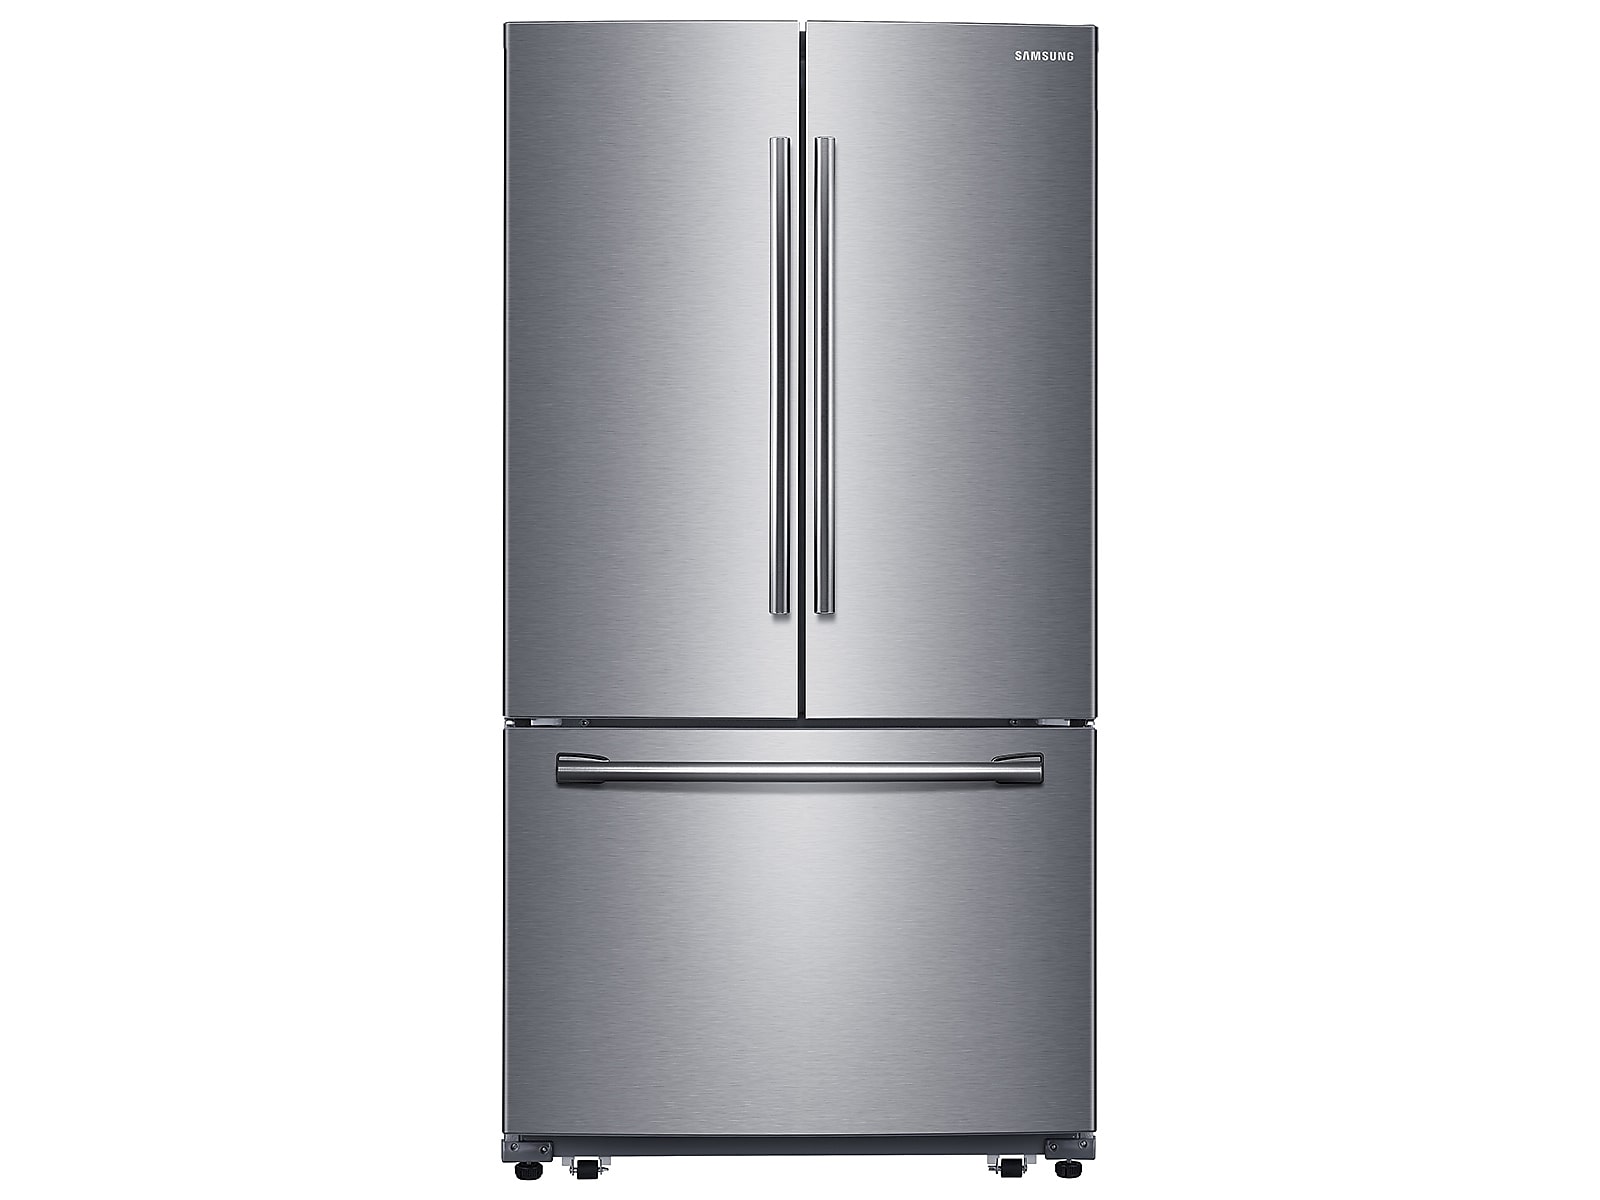 Samsung 26 cu. ft. French Door Refrigerator with Filtered Ice Maker in Stainless Steel(RF260BEAESR/AA) photo